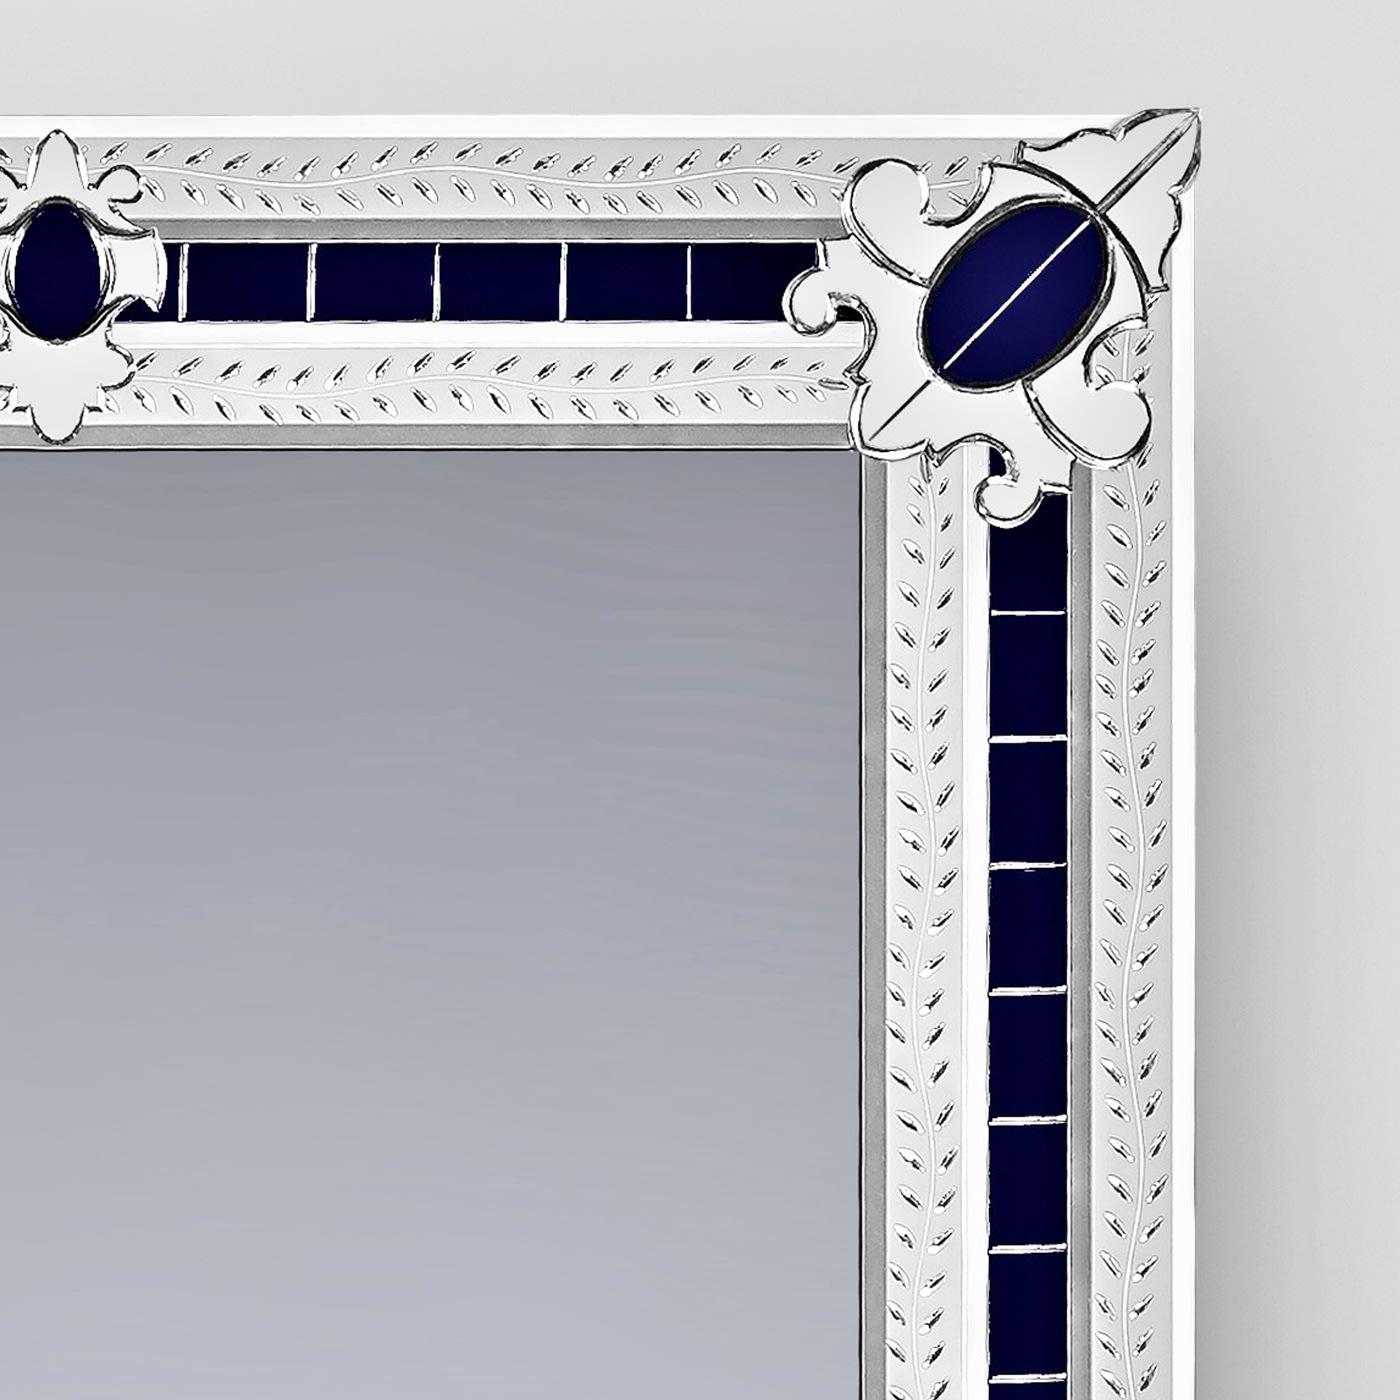 Magnificent rectangular mirror composed of beveled and silvered mirror embroideries in the corners, all handmade with bands engraved with a floral subject, on a blue Murano glass mirror background. This miniature reproduction of a larger mirror is